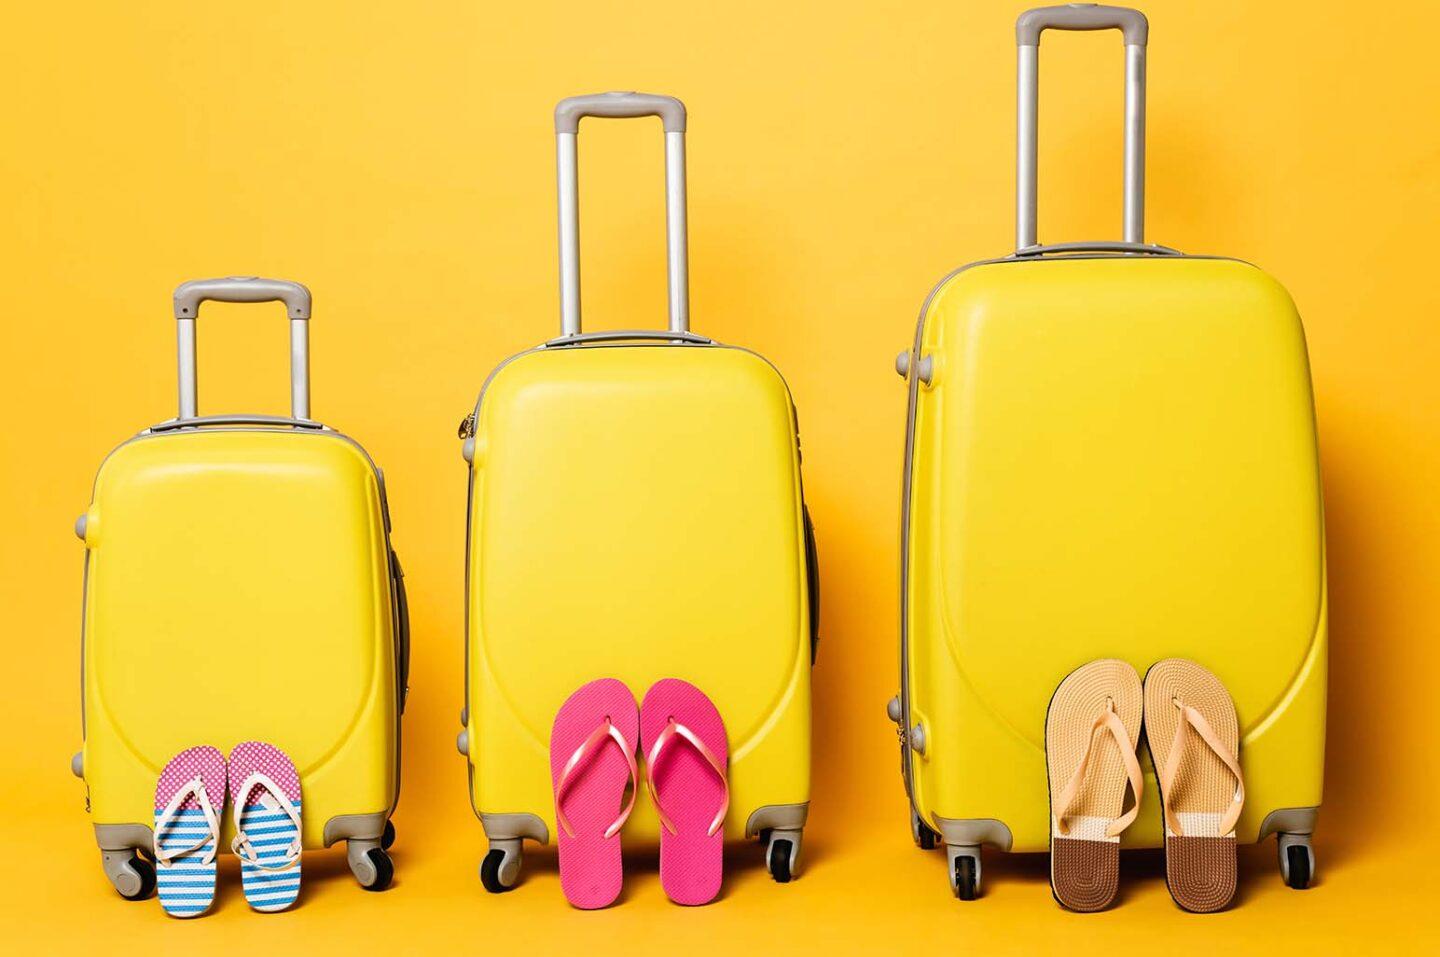 6 Family Travel Tips to Keep Everyone Happy on Vacation